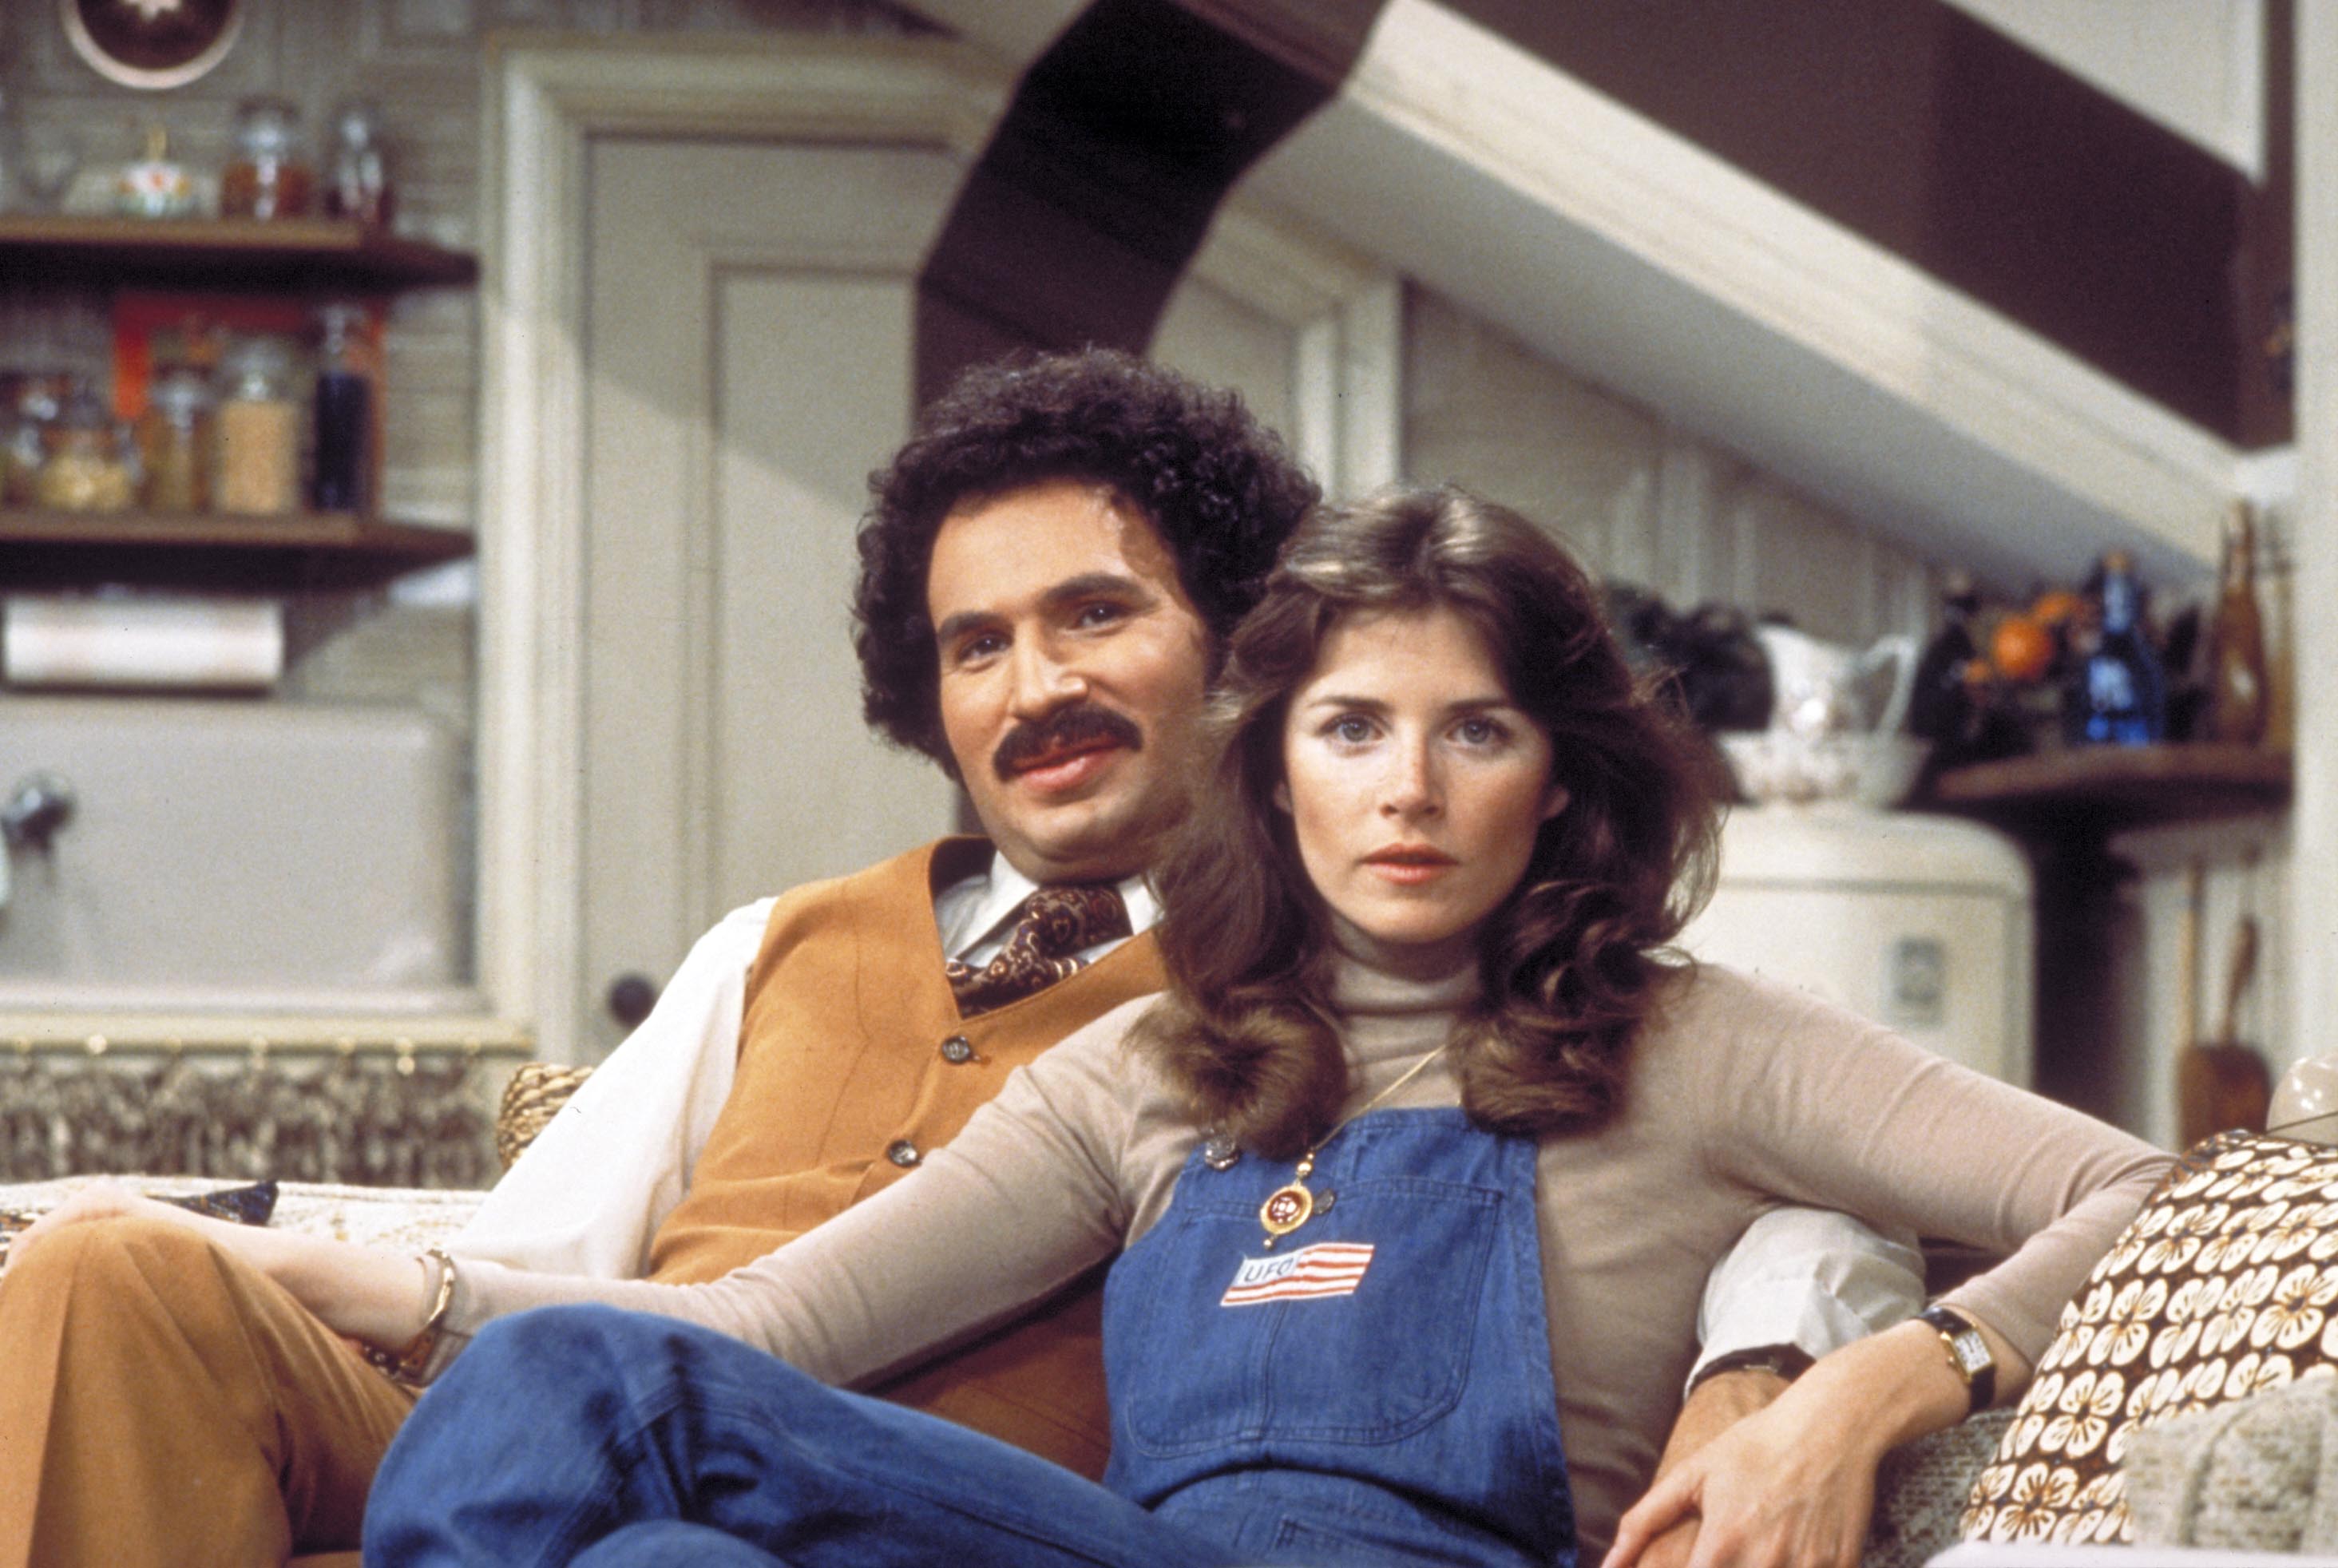 Gabe Kaplan and Marcia Strassman on the set of "Welcome Back, Kotter" onSeptember 23, 1976 | Source: Getty Images